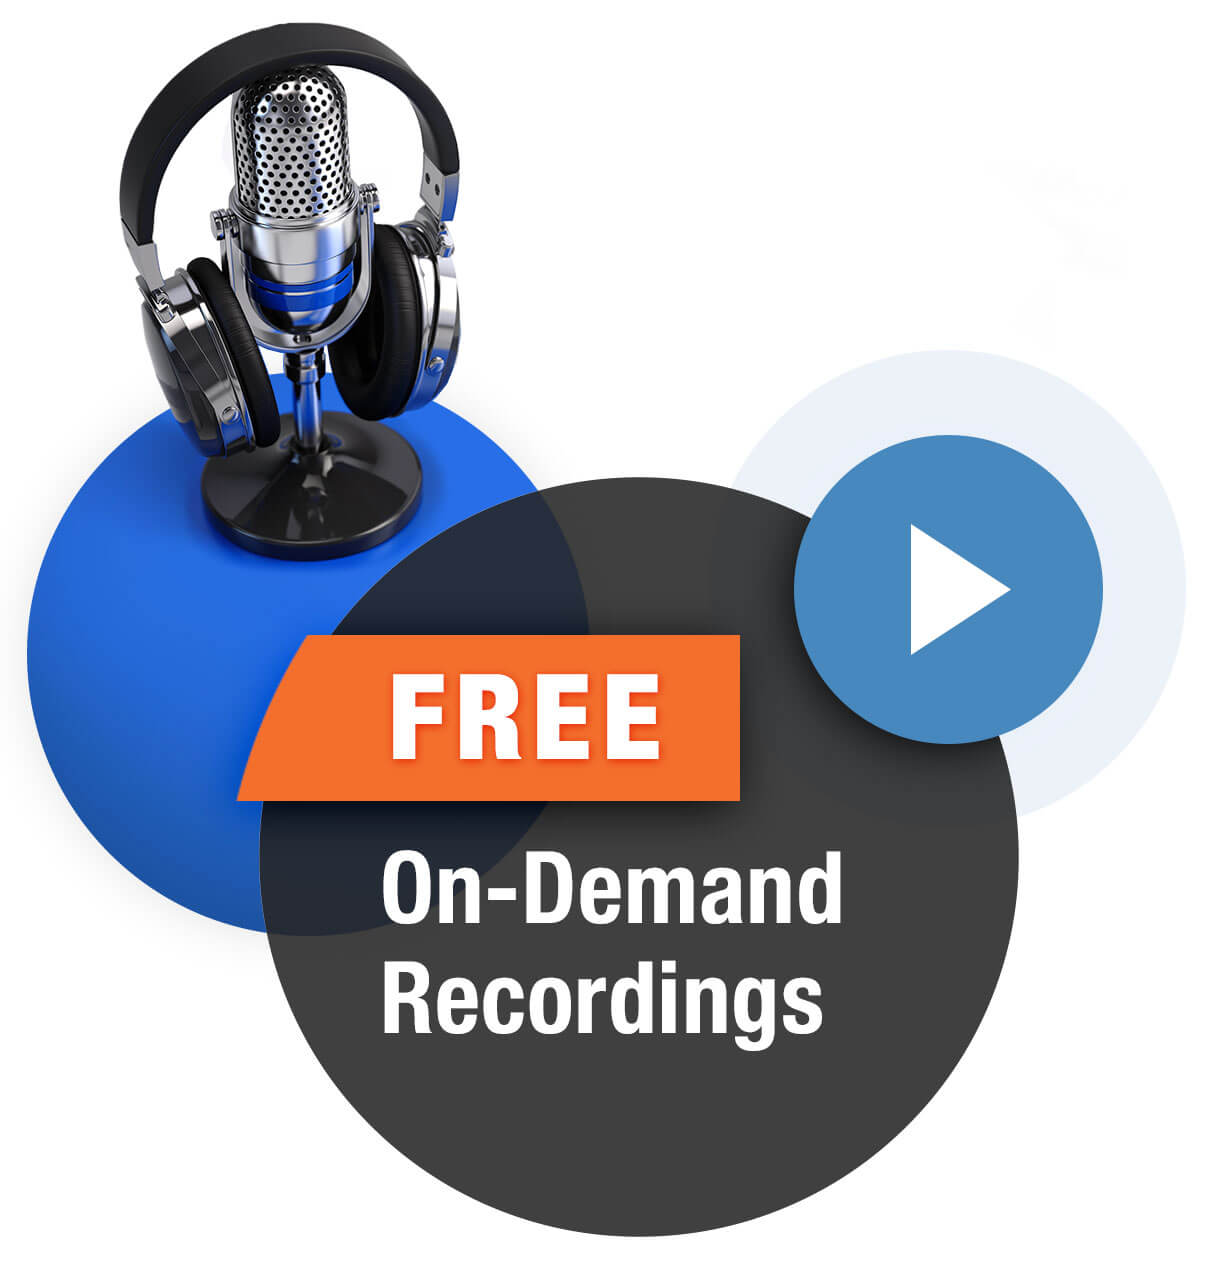 Free On-Demand Conference Recordings